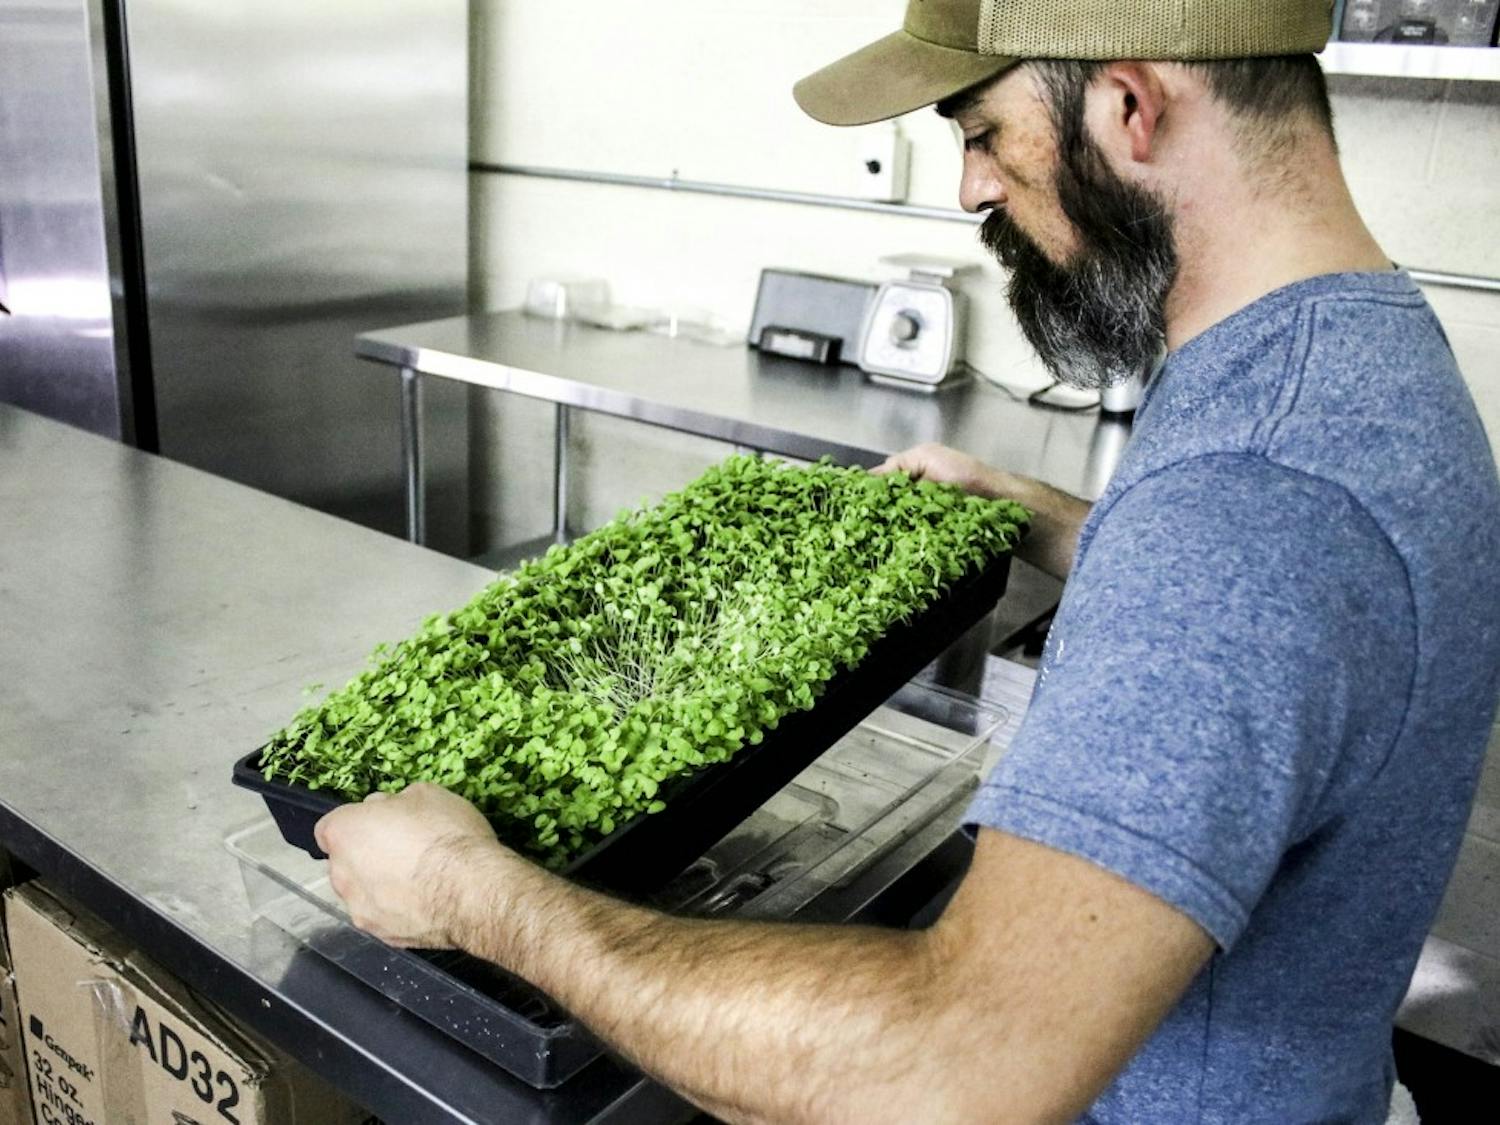 Ryan Tynan, Co-owner of Urbana works on prepping micro sprouts for harvest on Aug. 27, 2017.